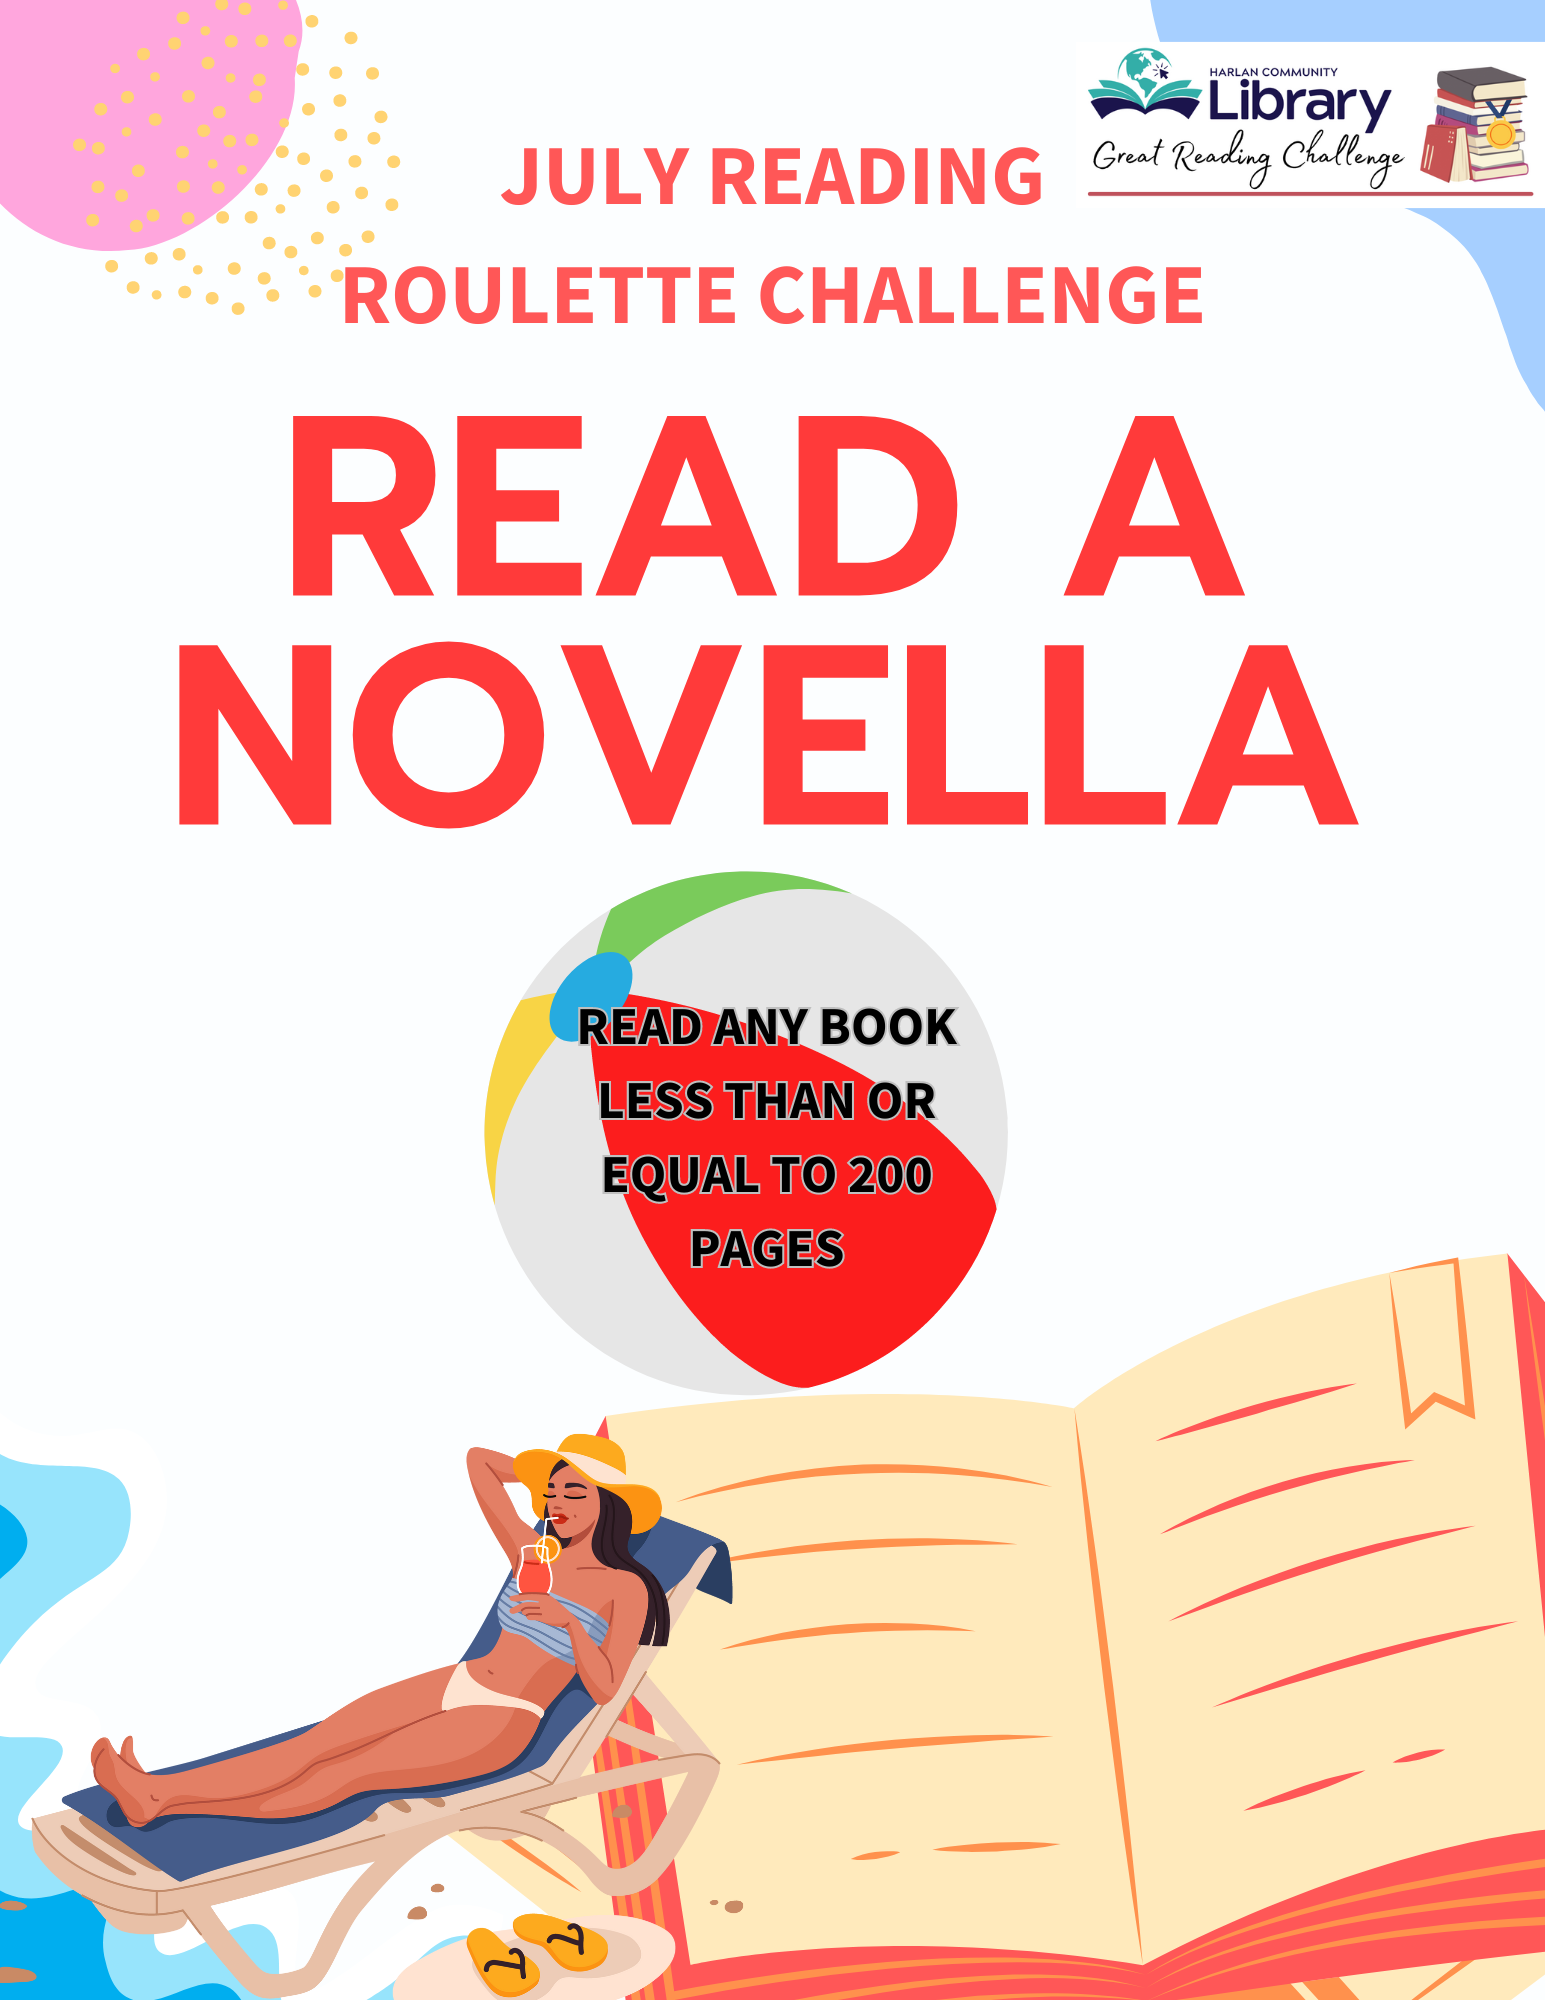 July Reading Roulette Challenge